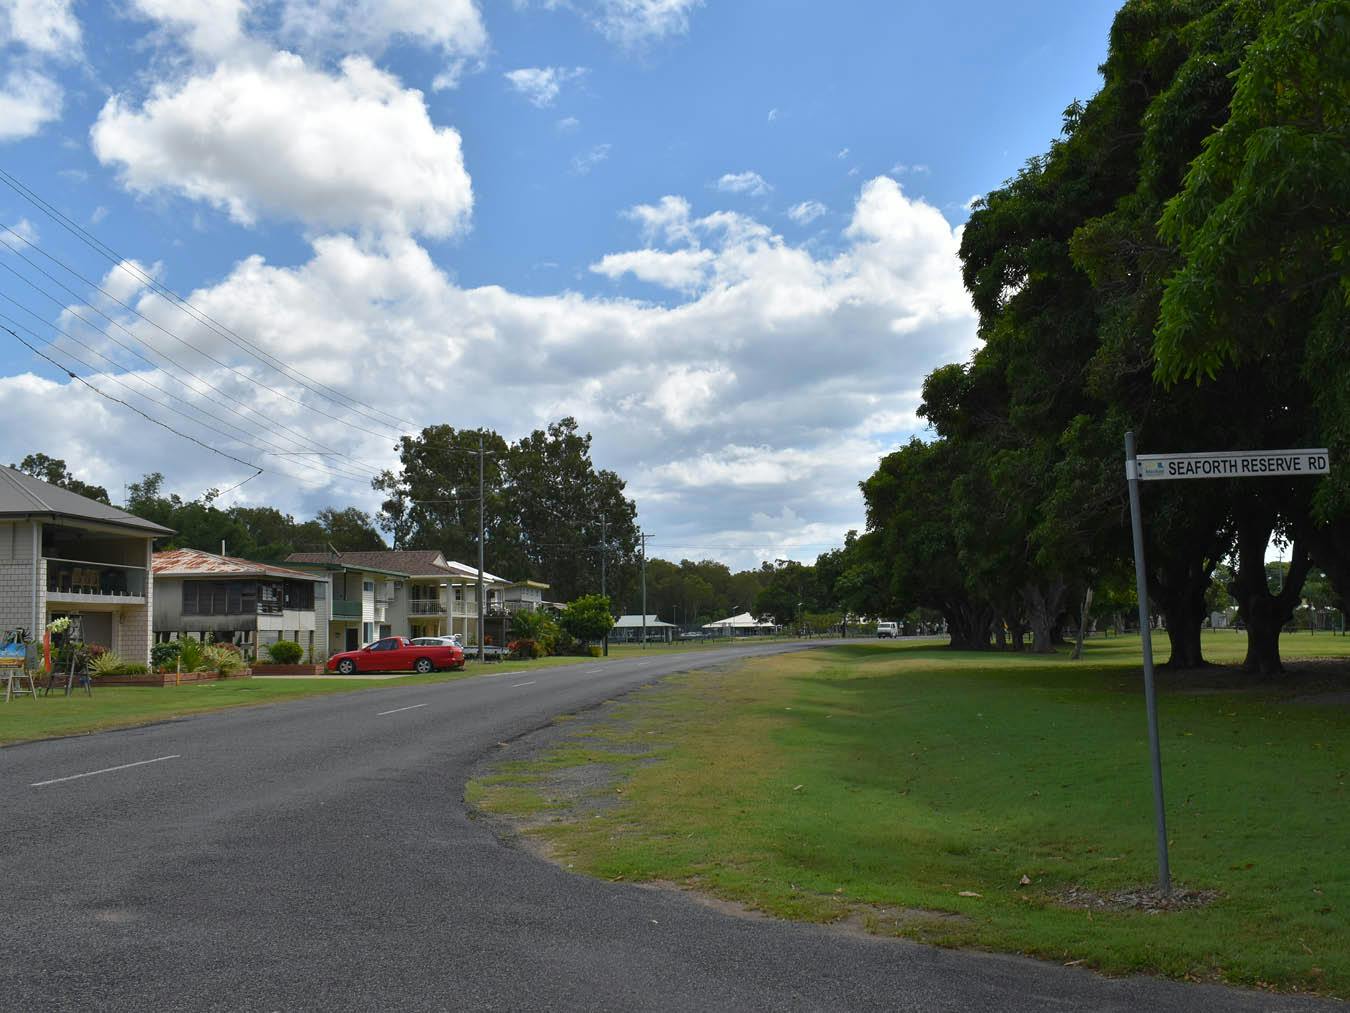 Western entry - This photograph at the entry looking west along Palm Avenue. The Seaforth Sports Grounds Reserve is visible in the background